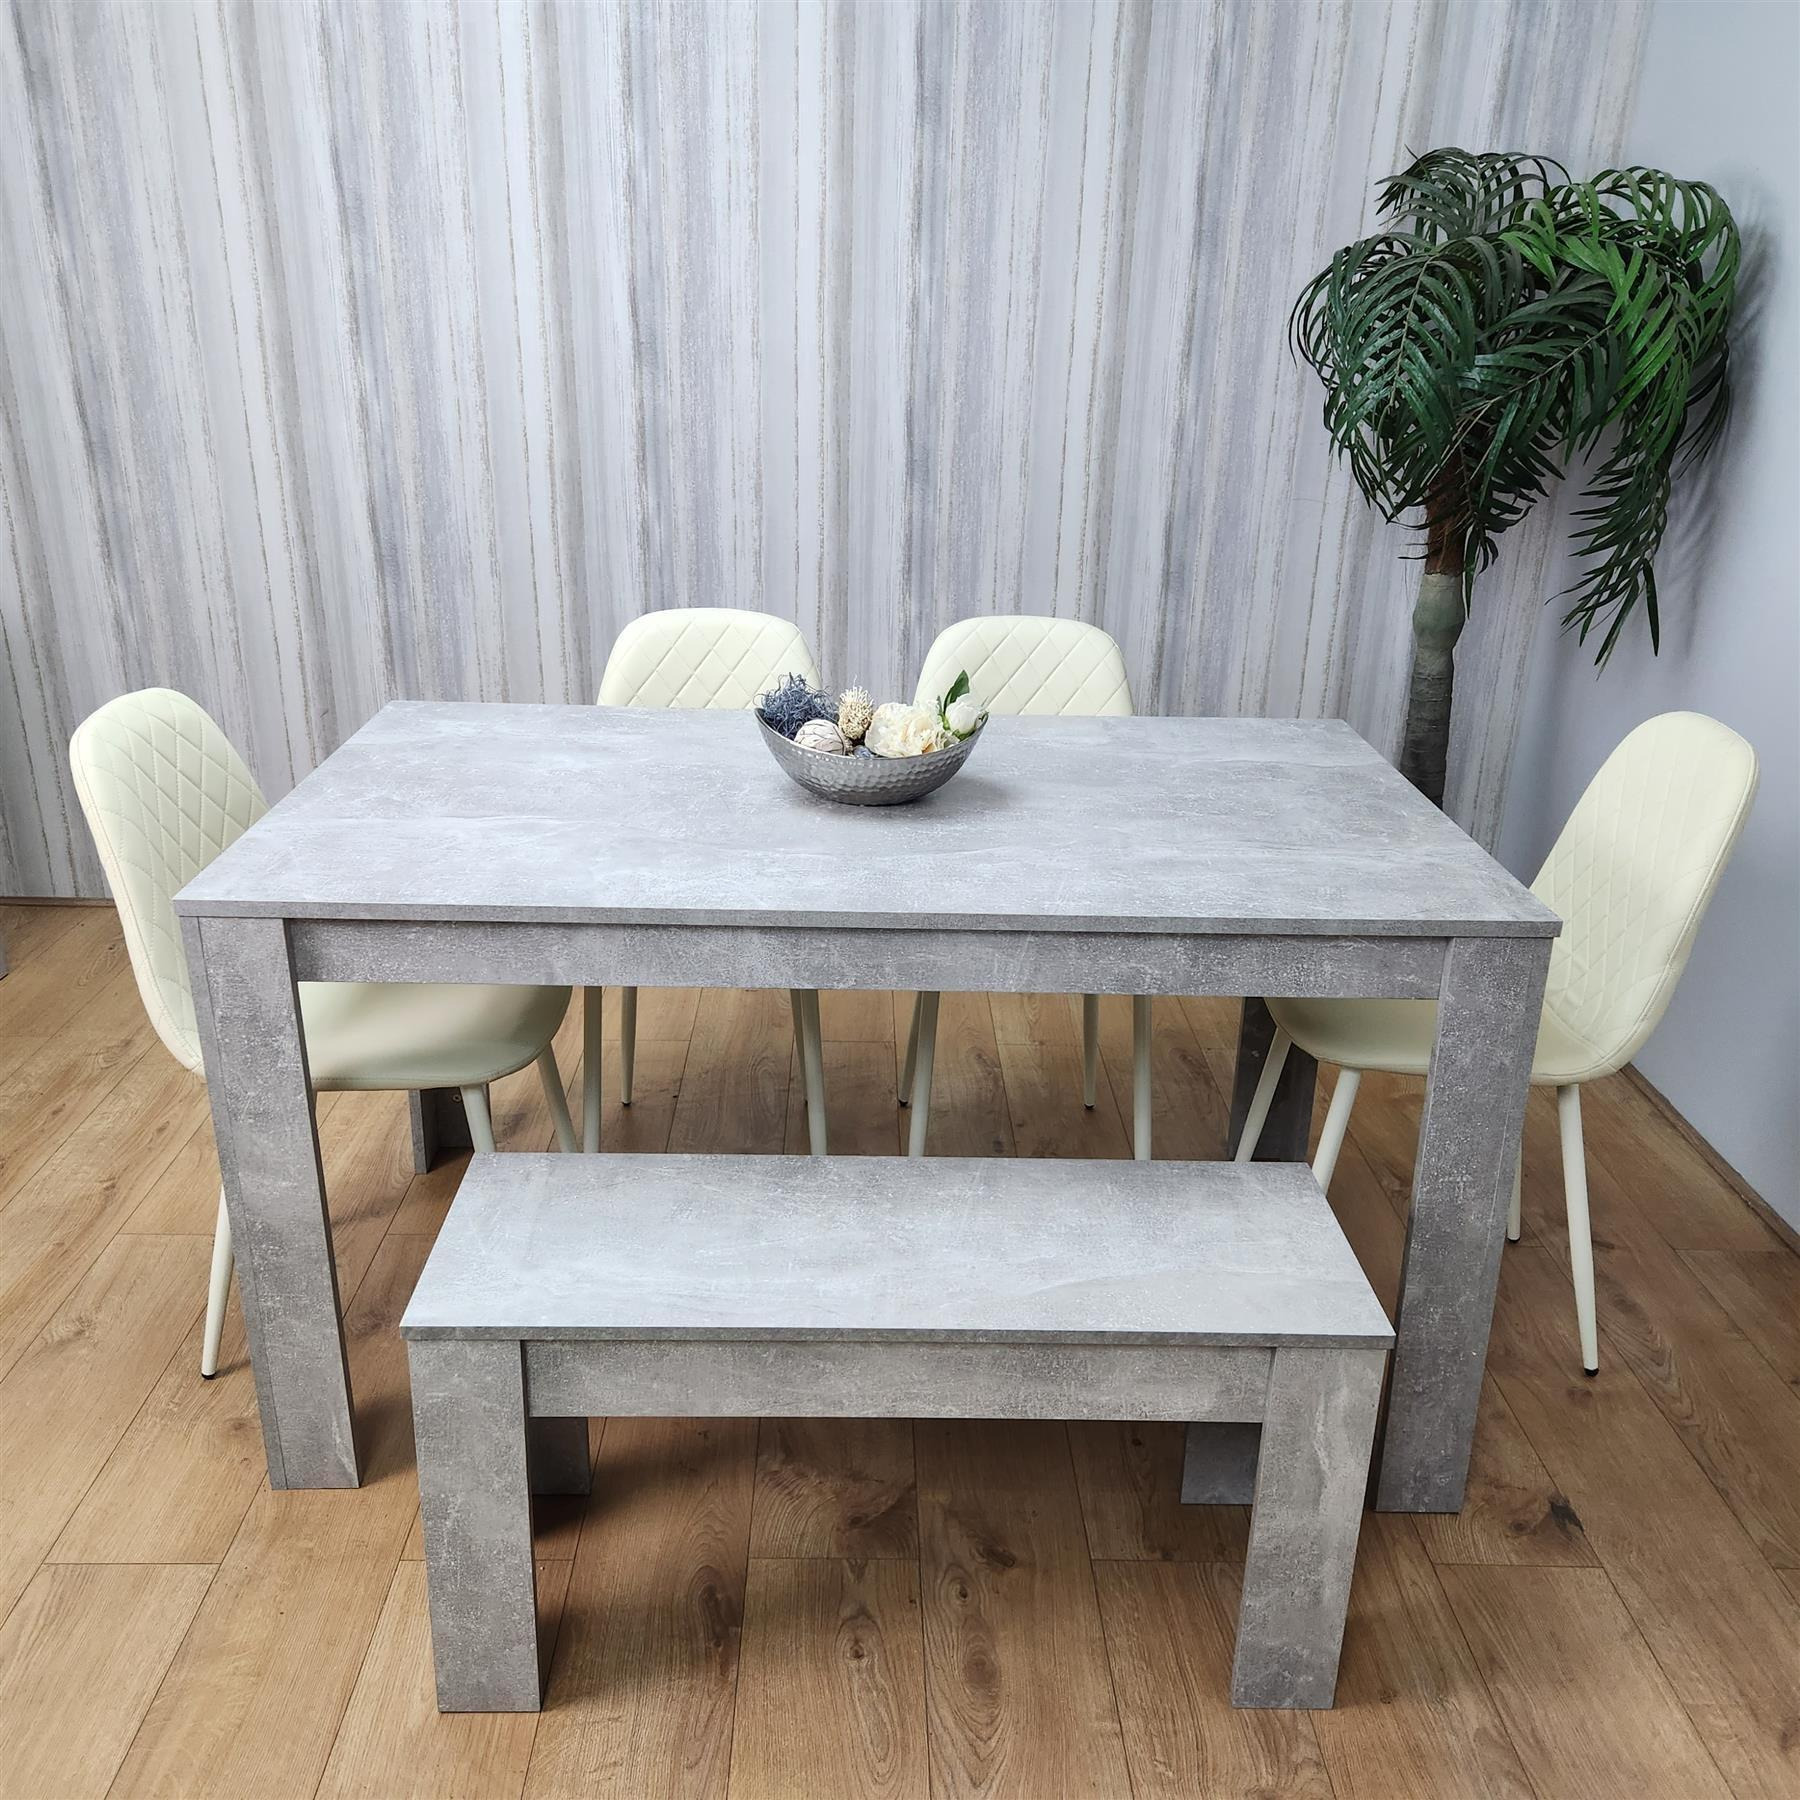 Kosy Koala Dining Table Set with 4 Chairs and a Bench Dining Room and Kitchen table set of 4 - image 1